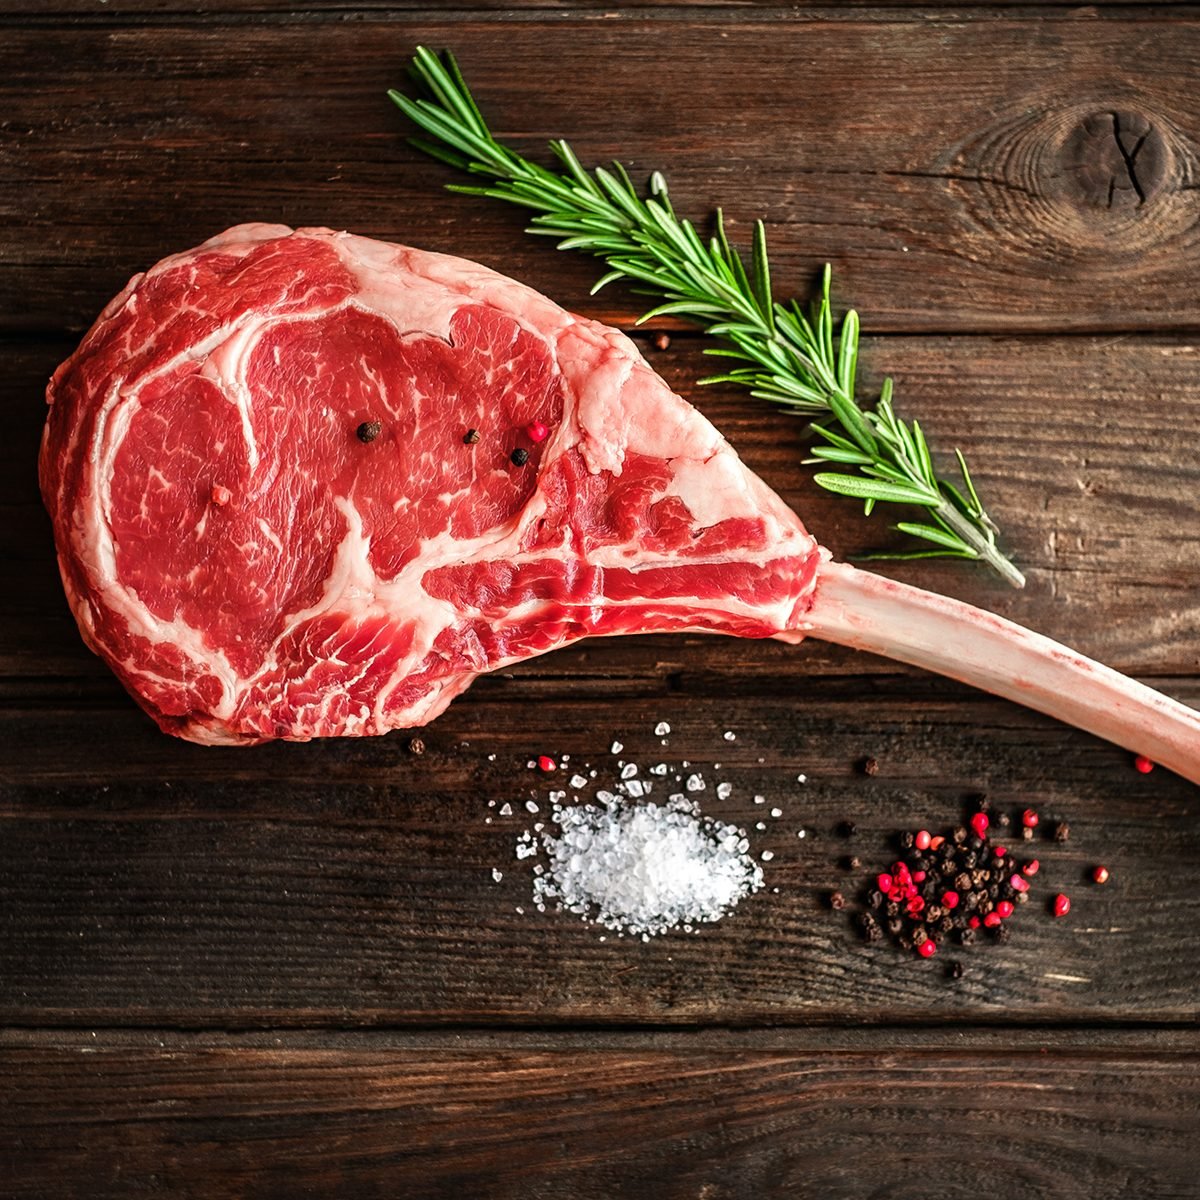 What Is the Best Cut of Steak? And How to Cook the Best Cut of